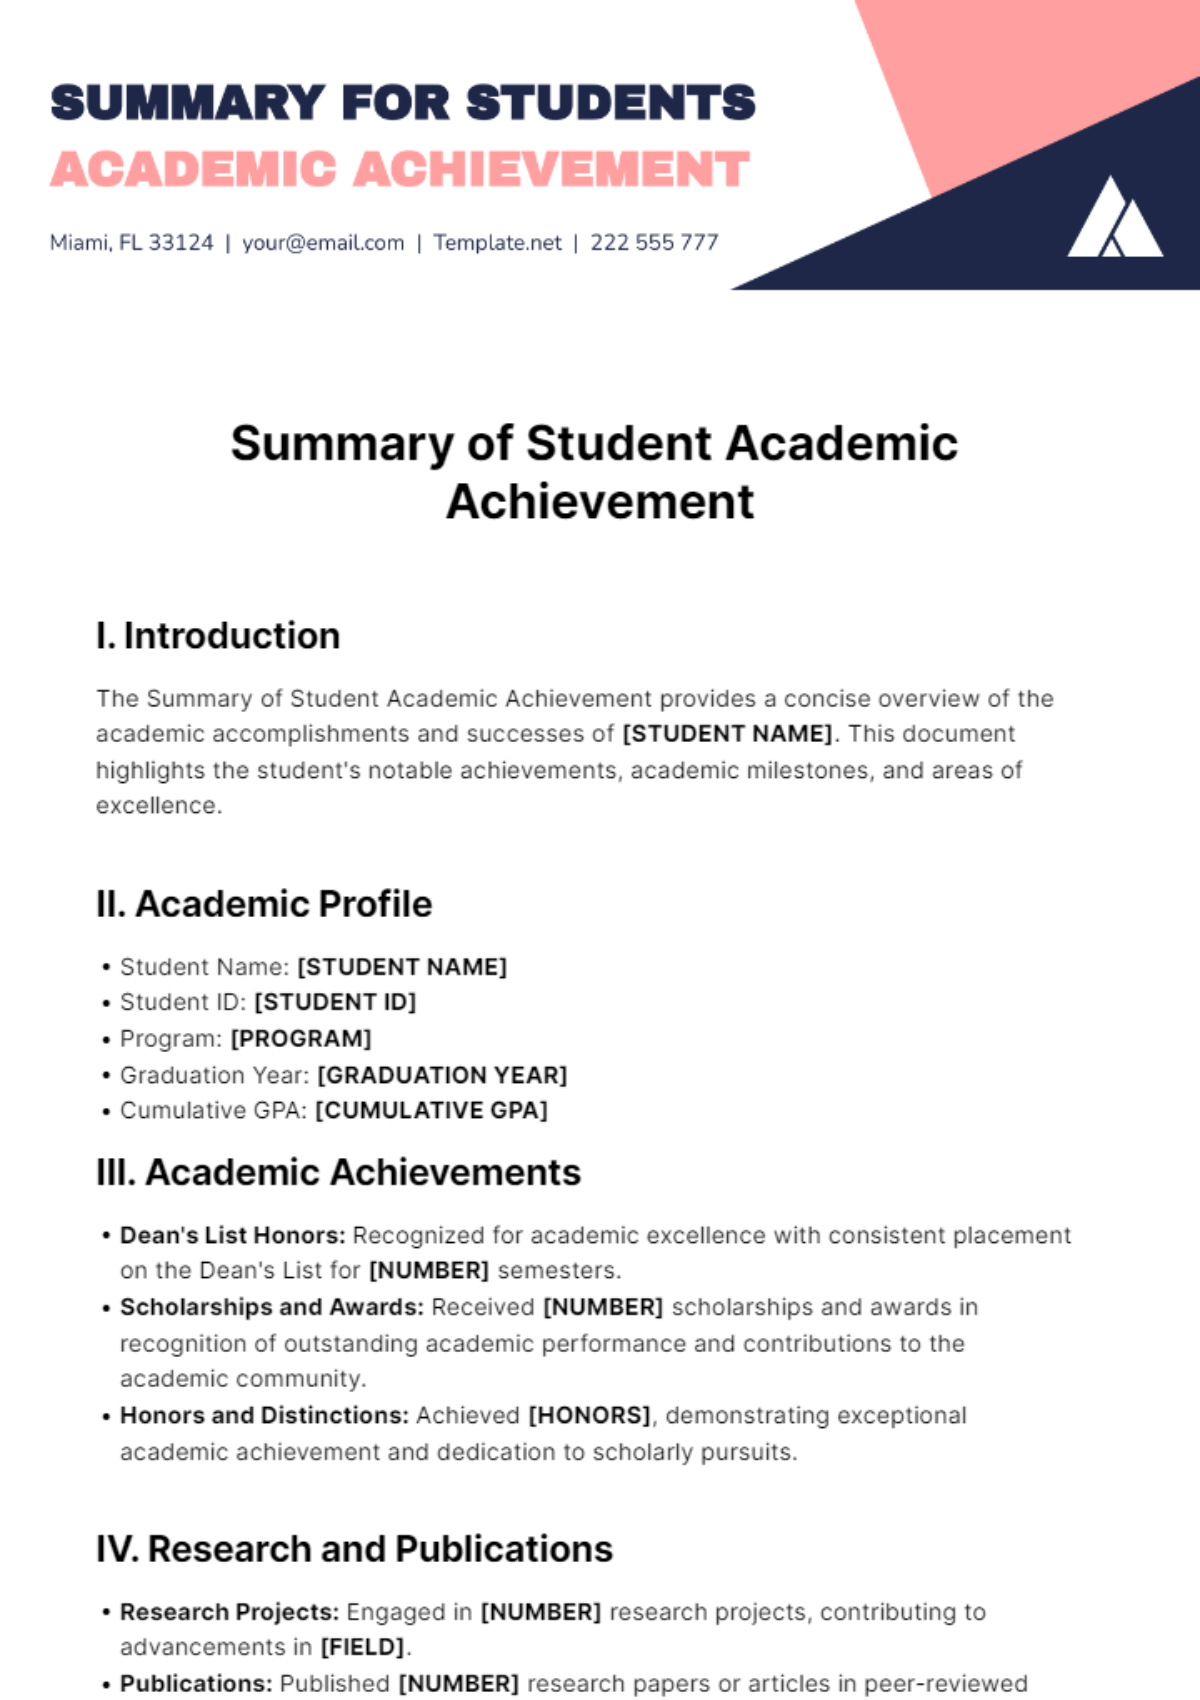 Free Summary of Student Academic Achievement Template